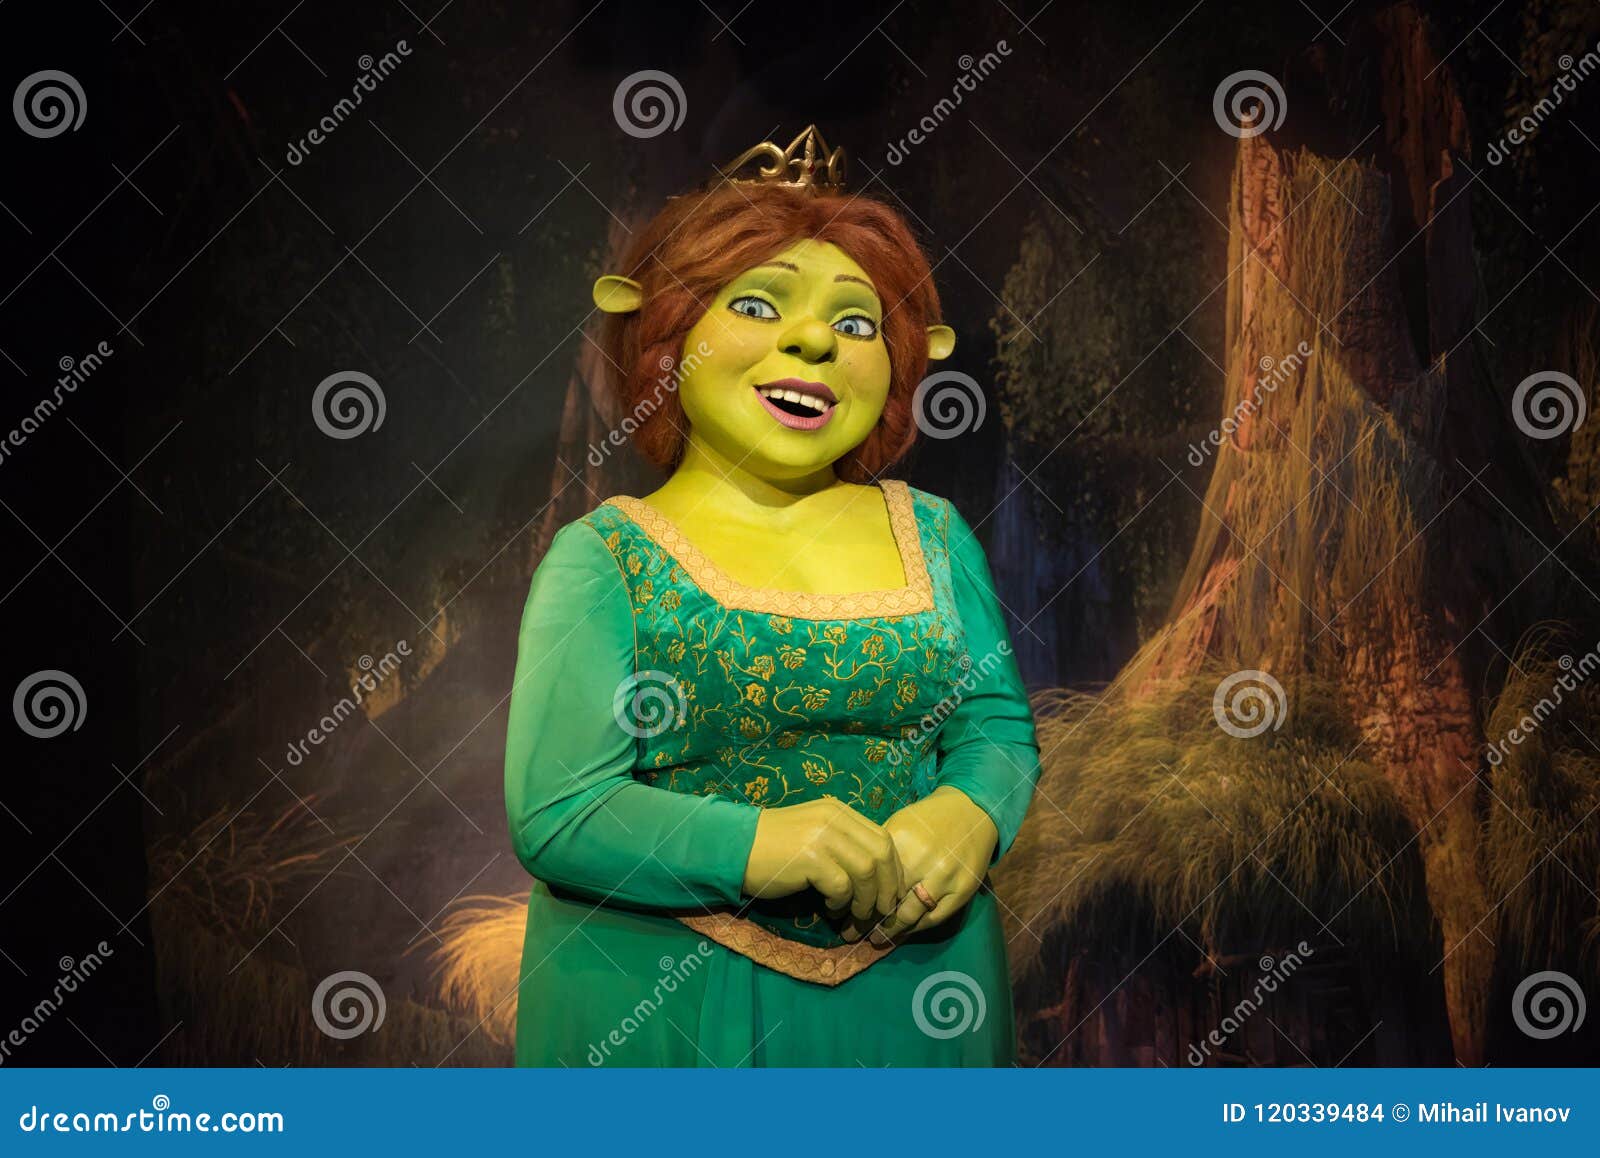 ashley skidmore add photo pictures of fiona from shrek